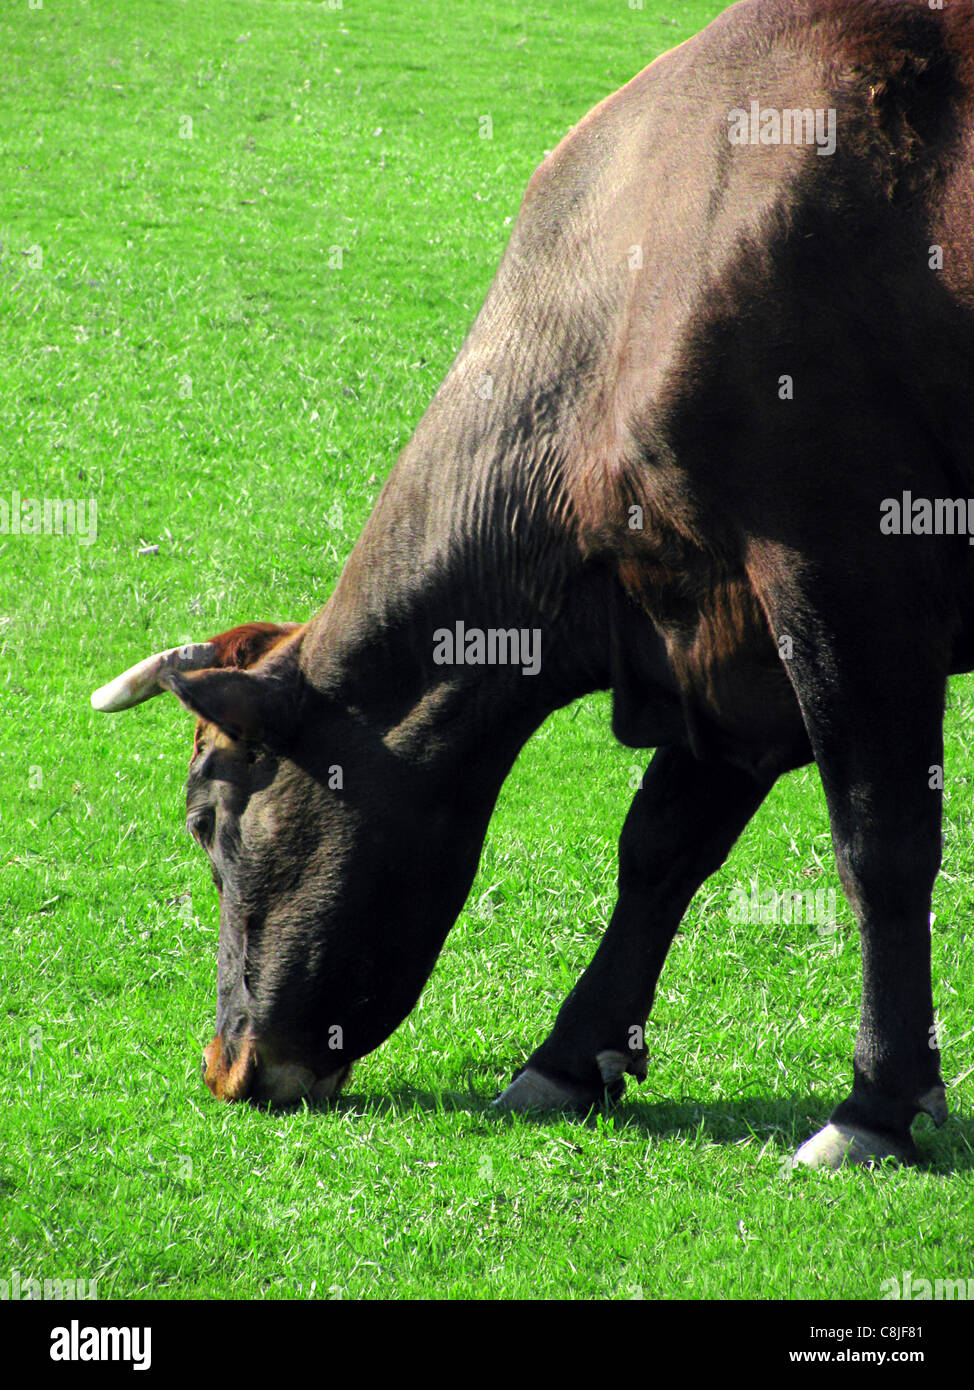 cow eating grass Stock Photo